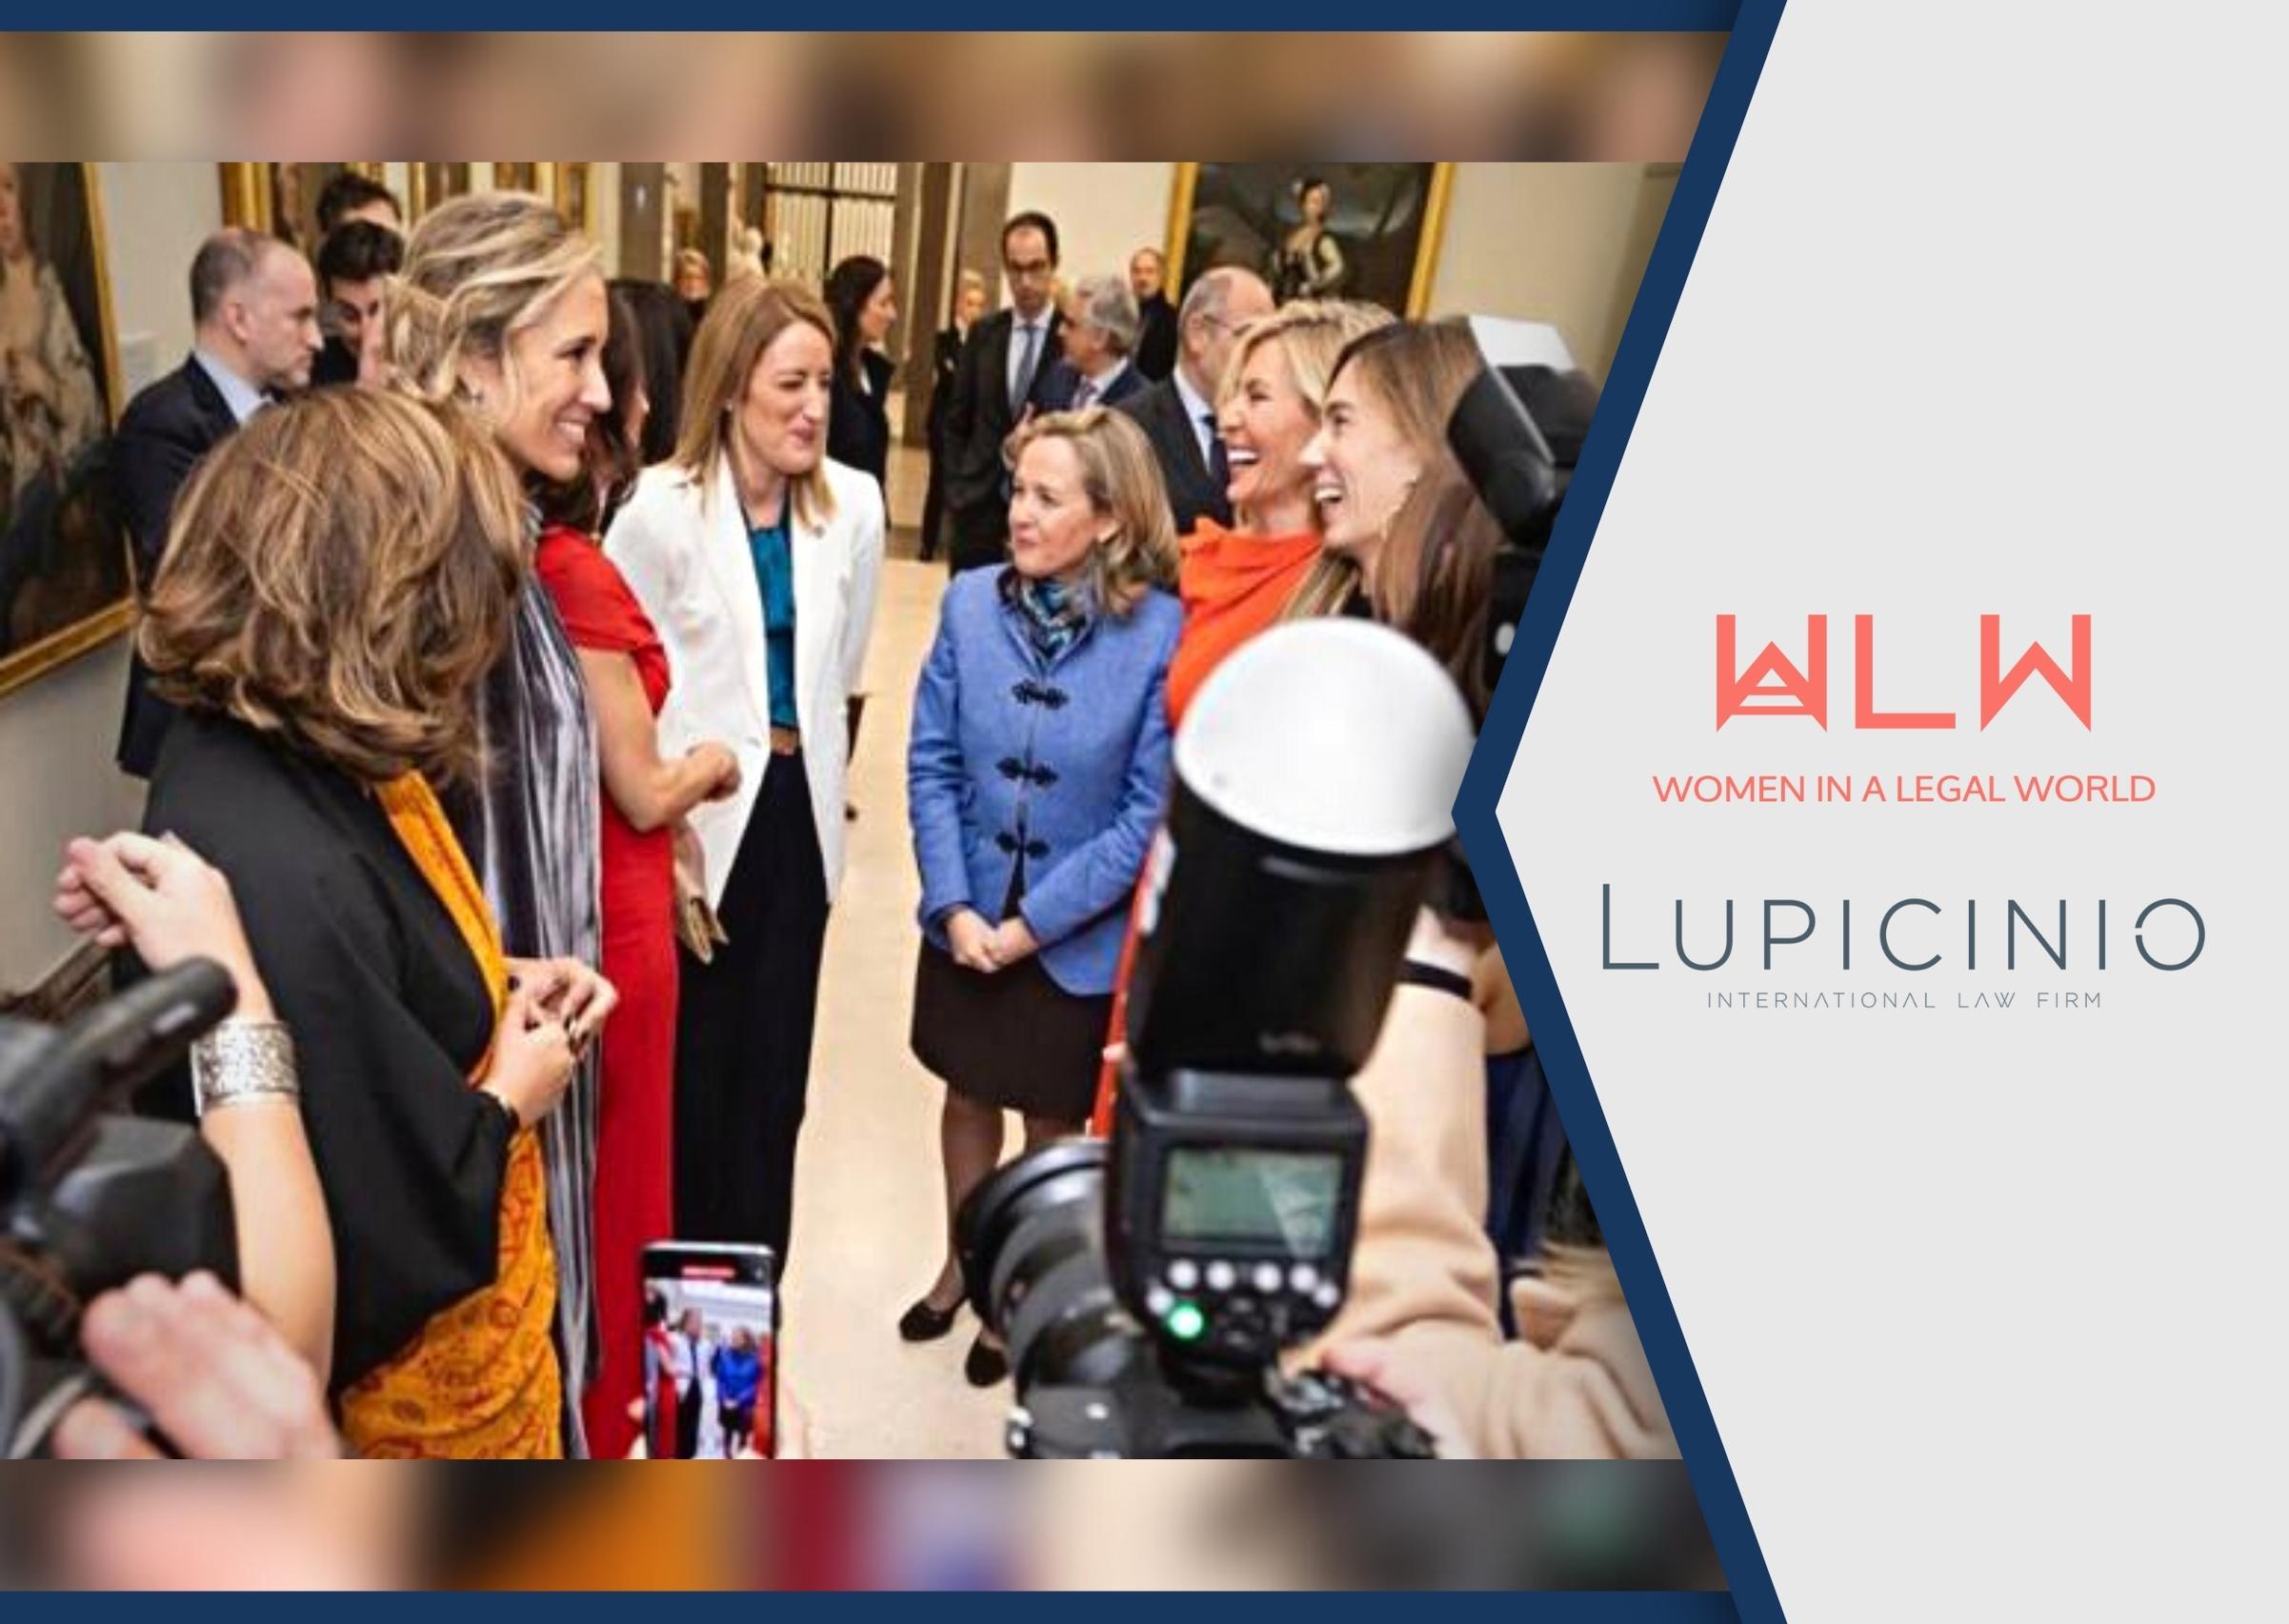 LILF PRESENTS THE IV EDITION OF THE WOMEN IN A LEGAL WORLD AWARDS